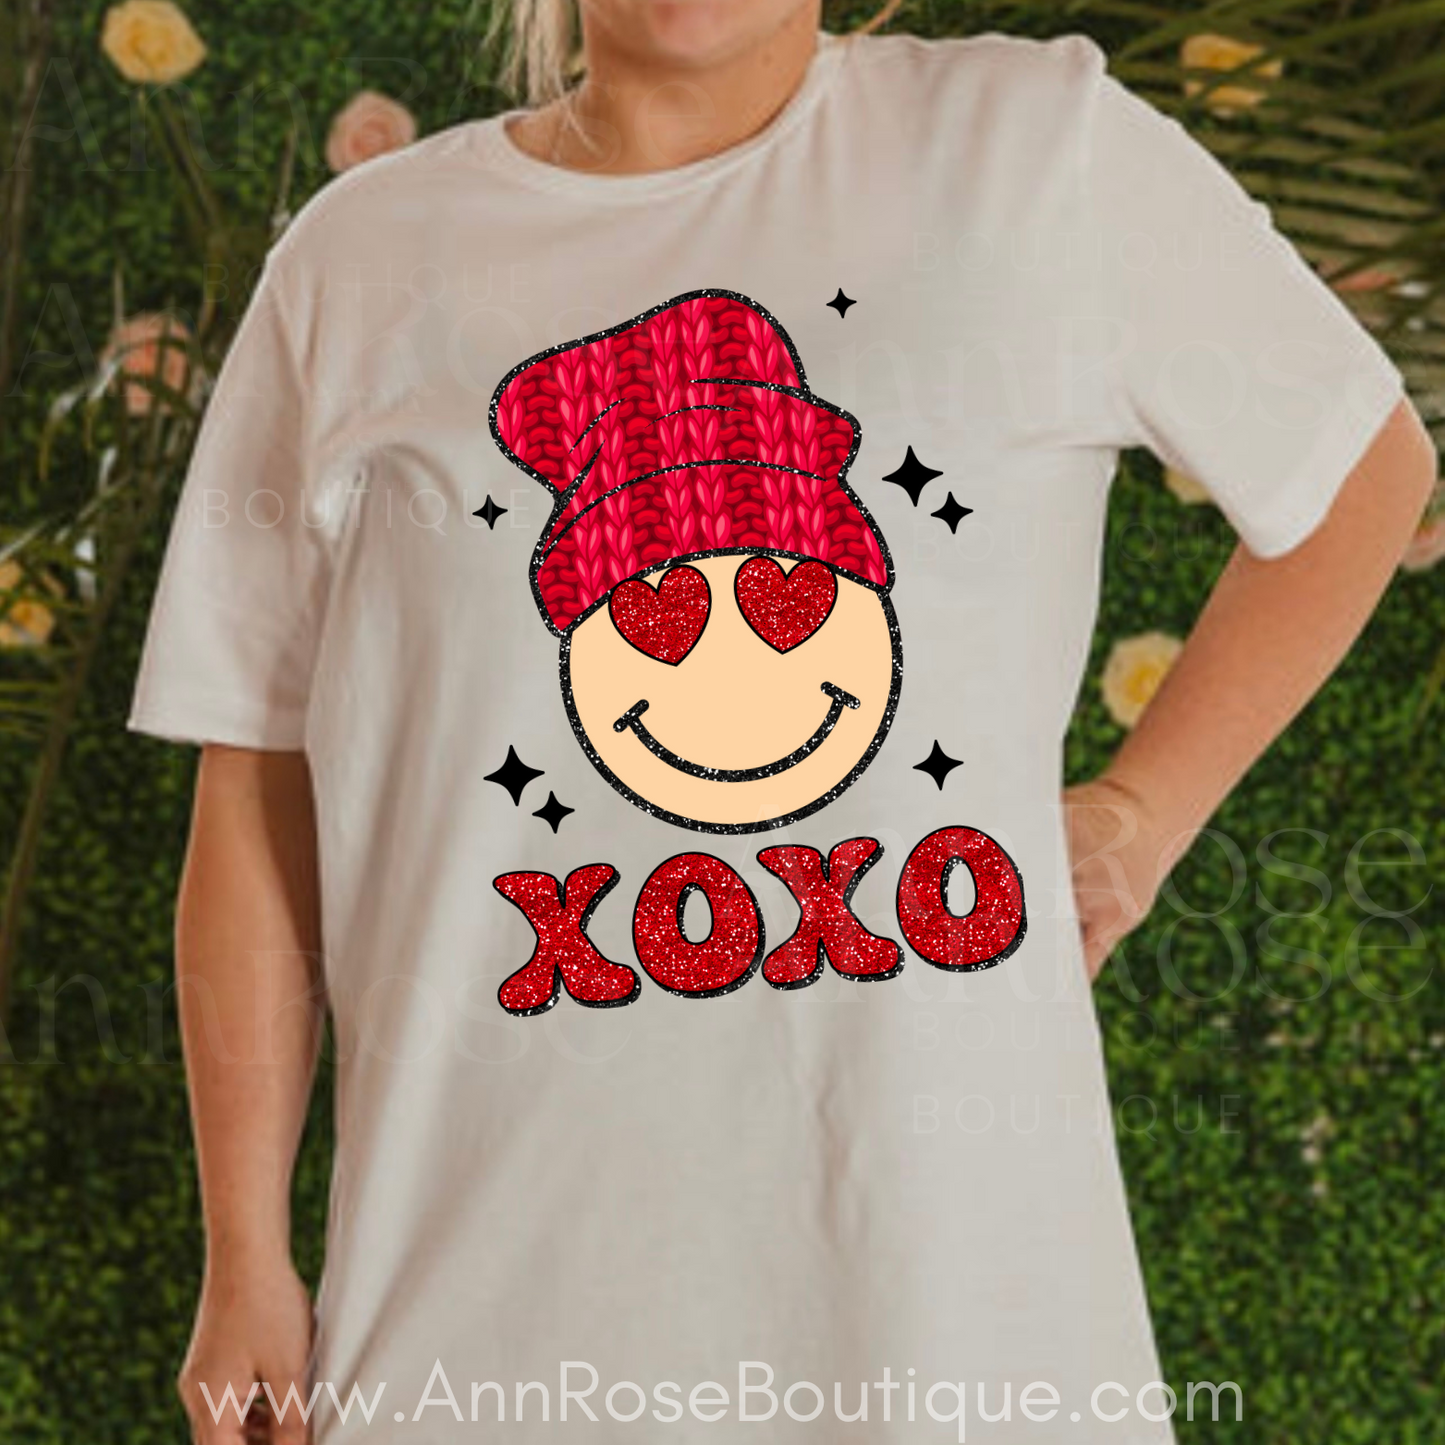 Xoxo red hat